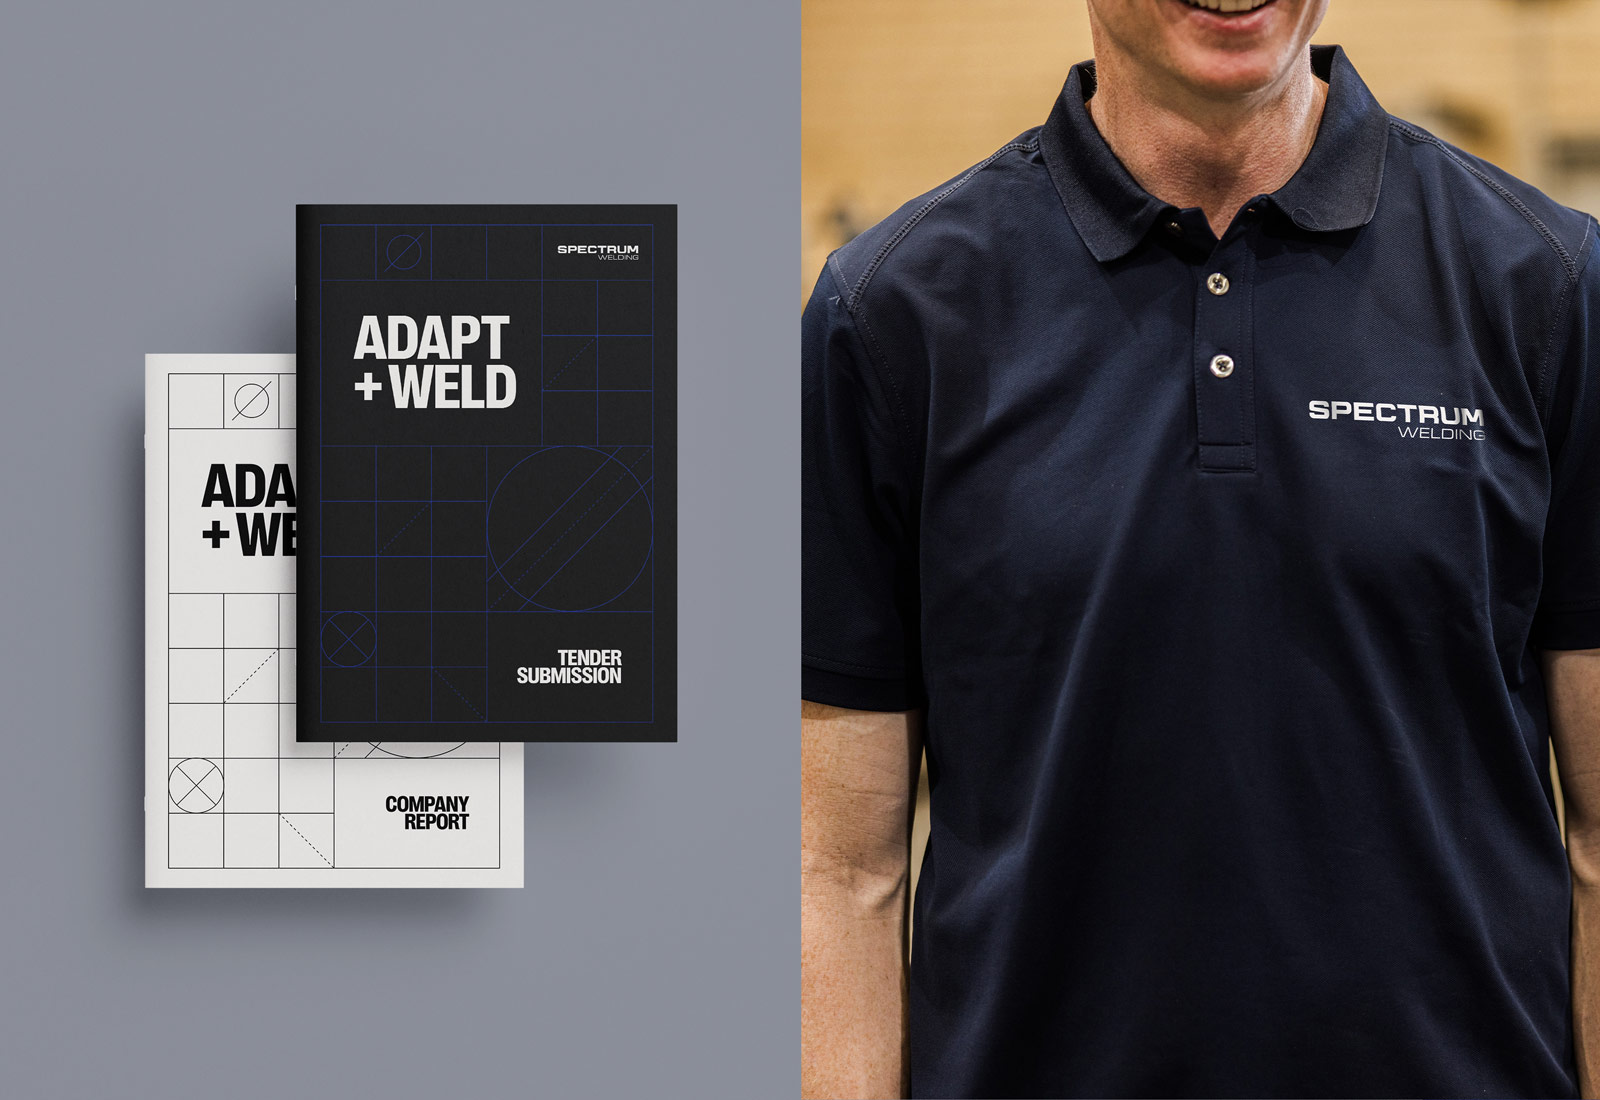 Spectrum welding logo showcased on a uniform and print collateral design